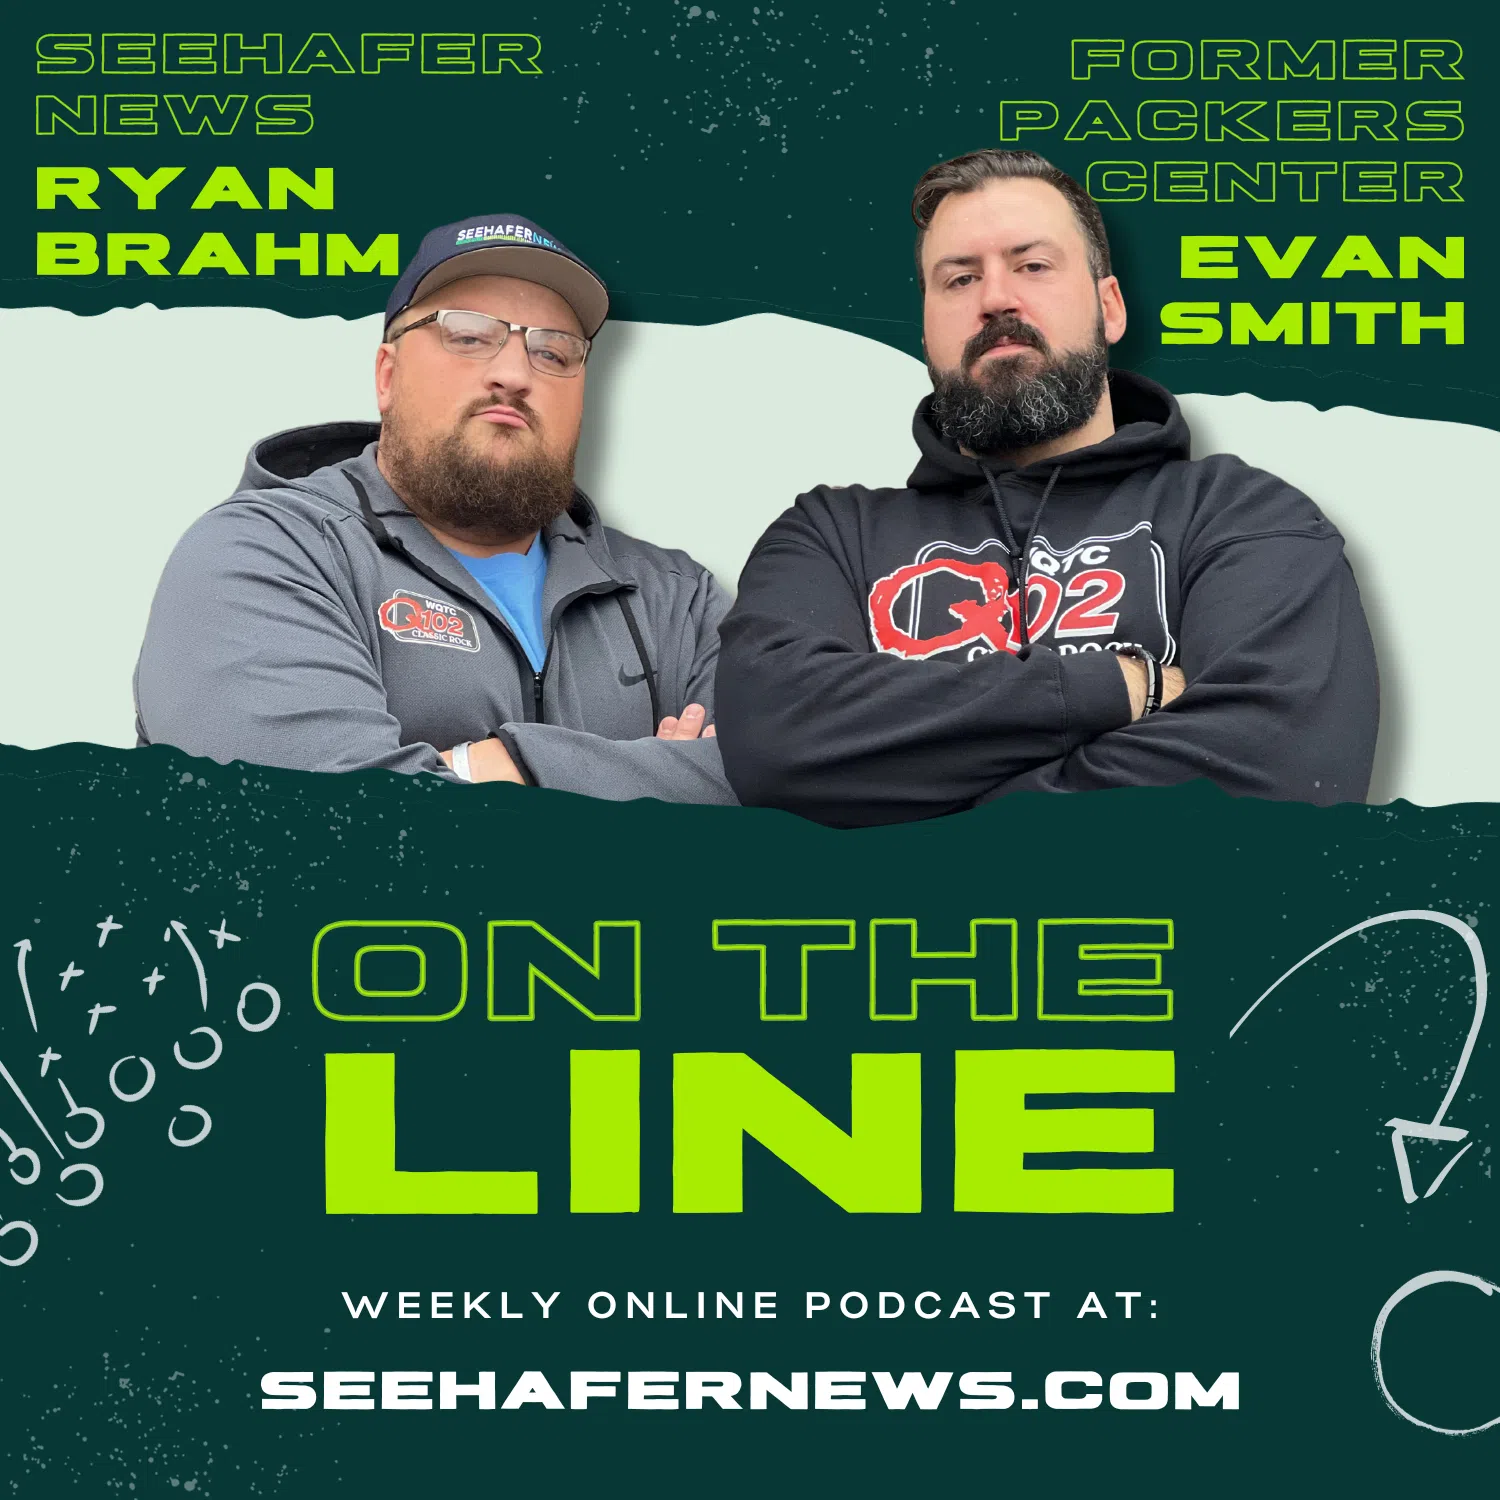 Former Packers Player and Seehafer News Team Up for New Podcast